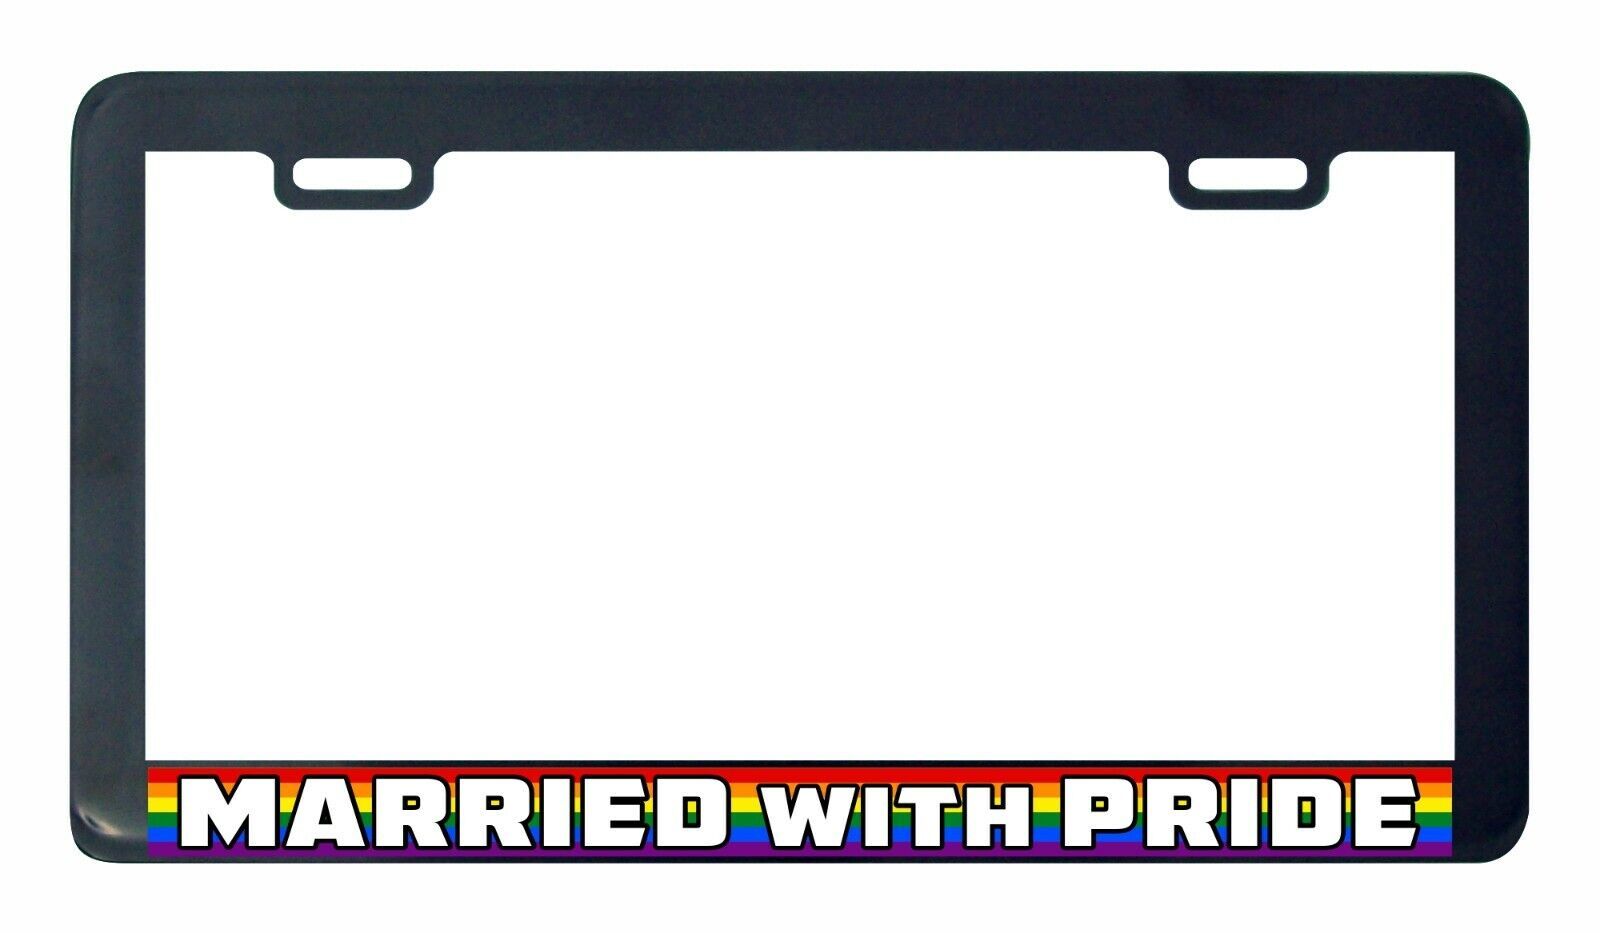 Primary image for Married with pride Gay Lesbian pride rainbow LGBTQ license plate frame